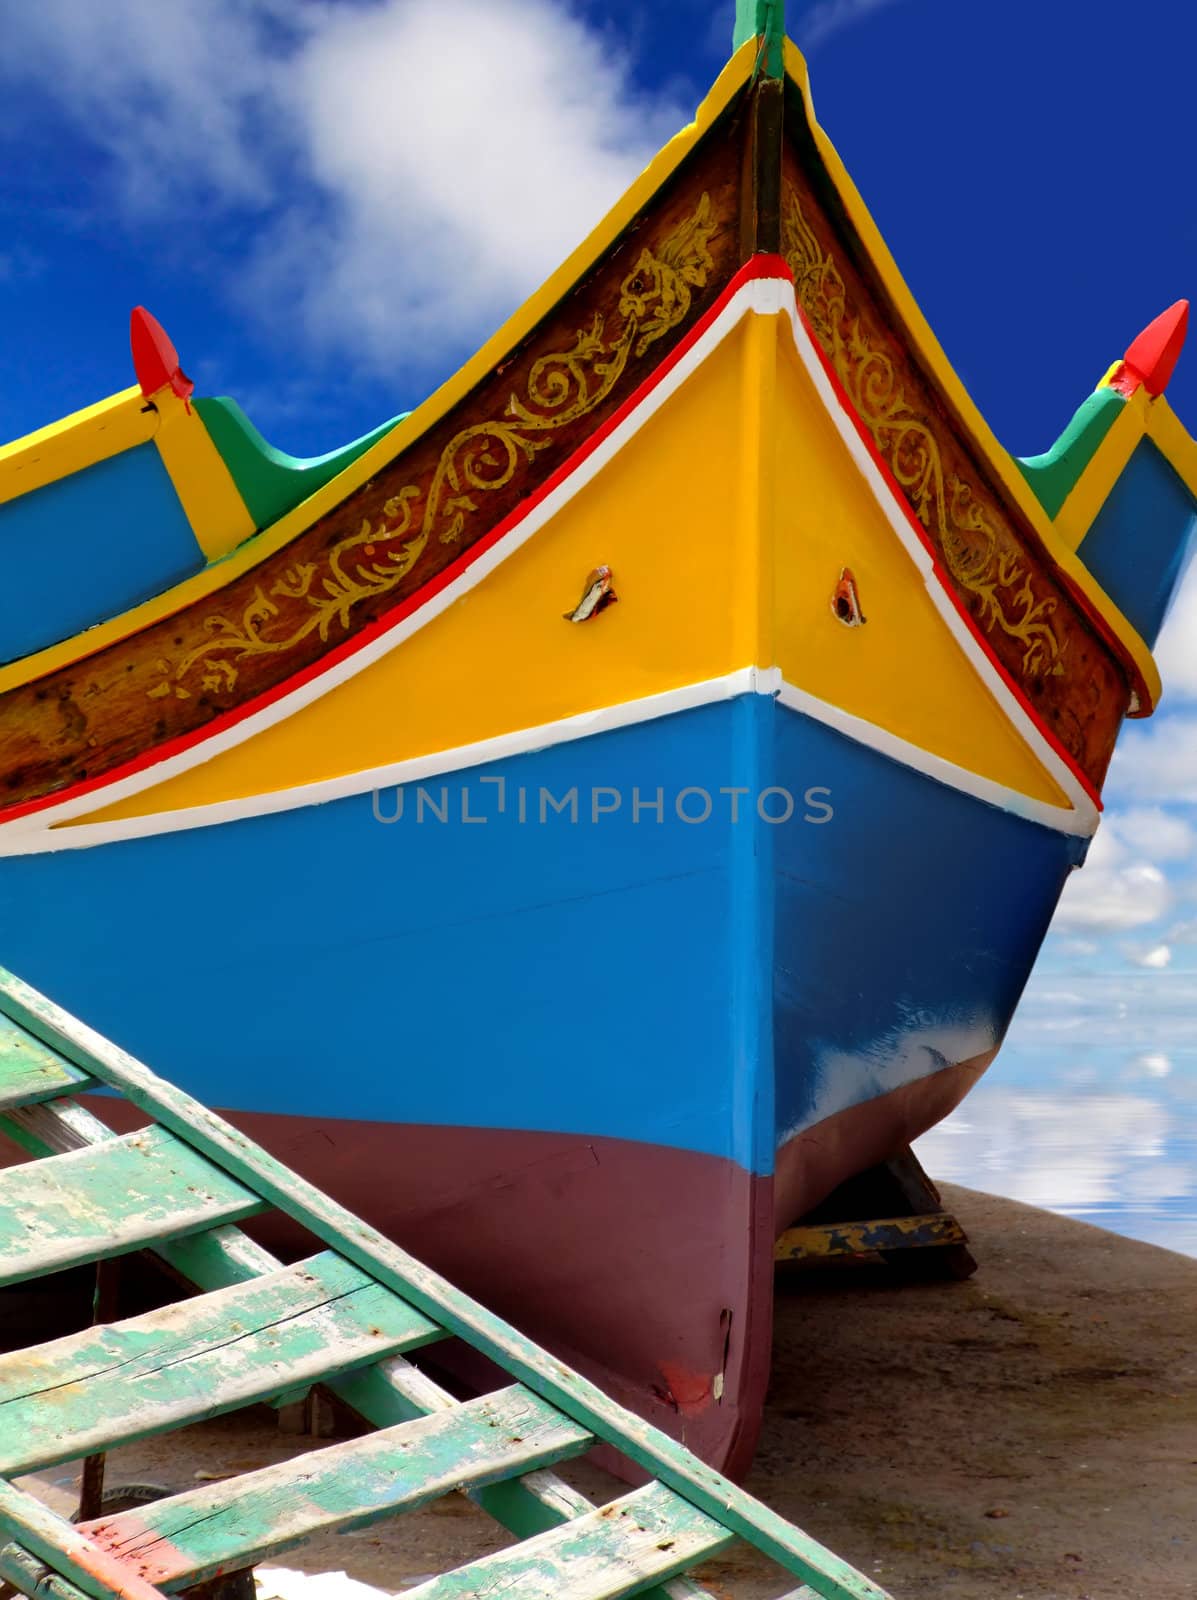 Malta Fishing Boat by PhotoWorks